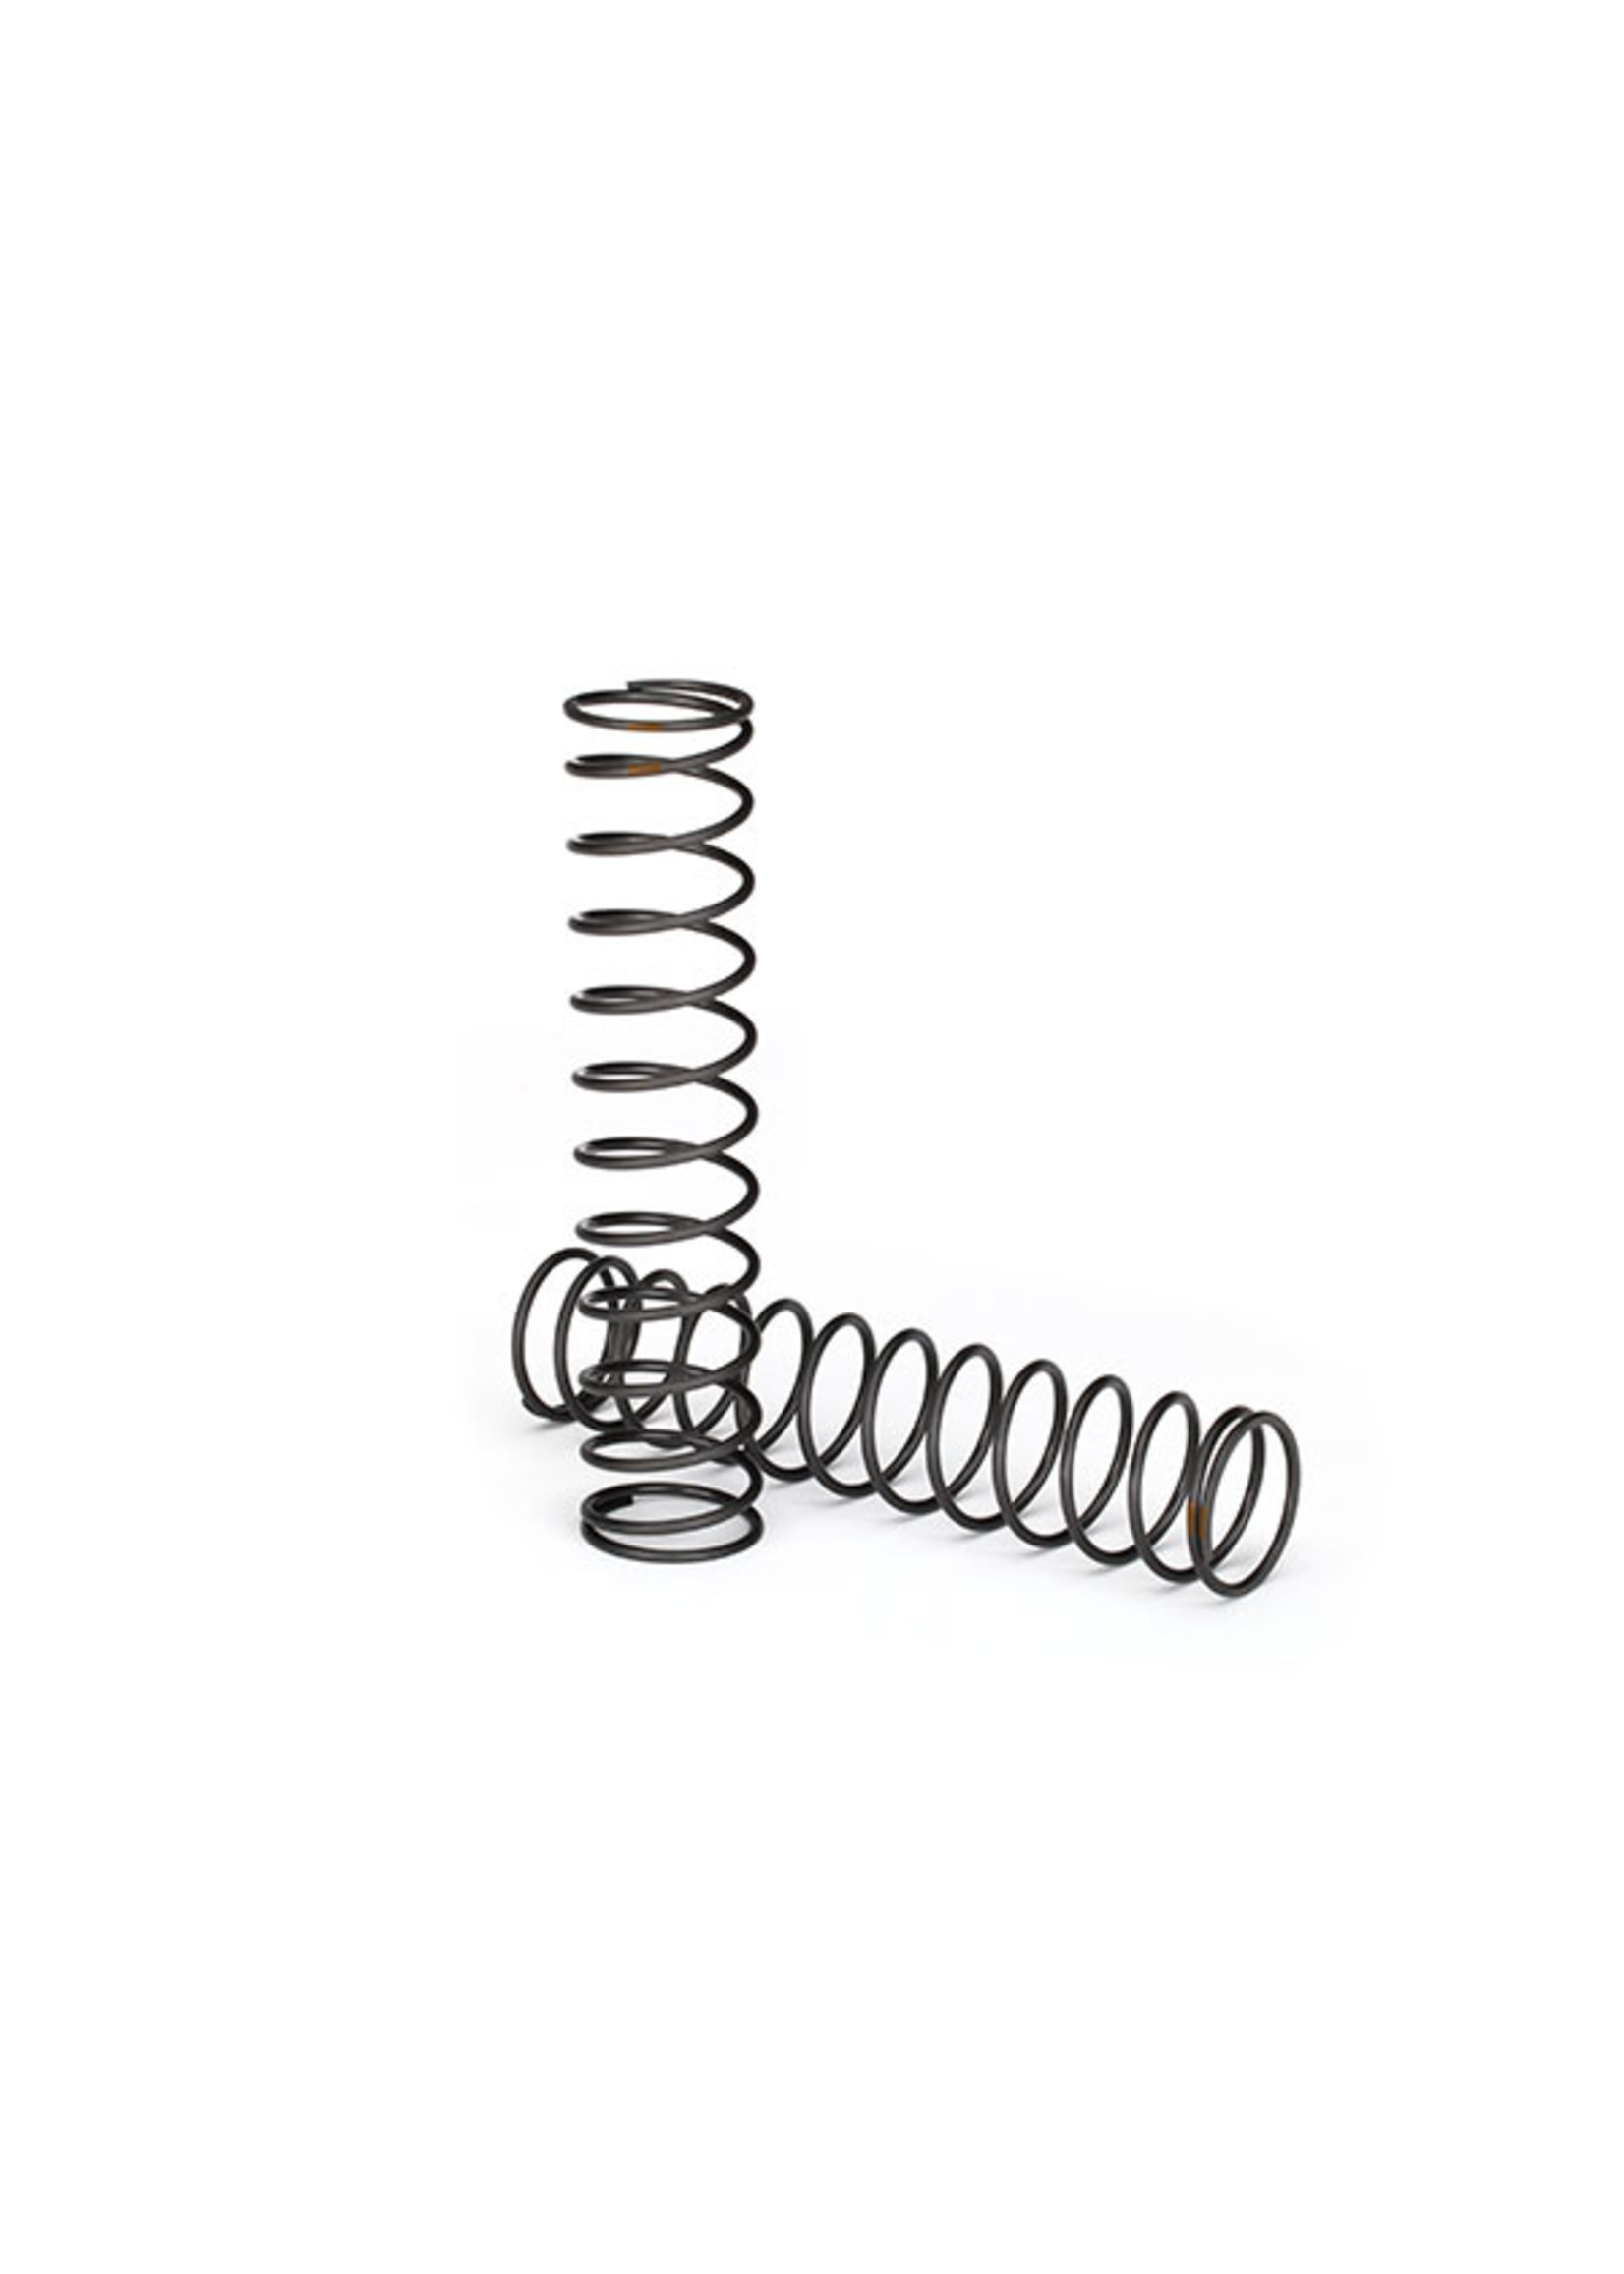 Traxxas 7856 - Shock Spring, GTX 1.346 Rate - Natural Finish